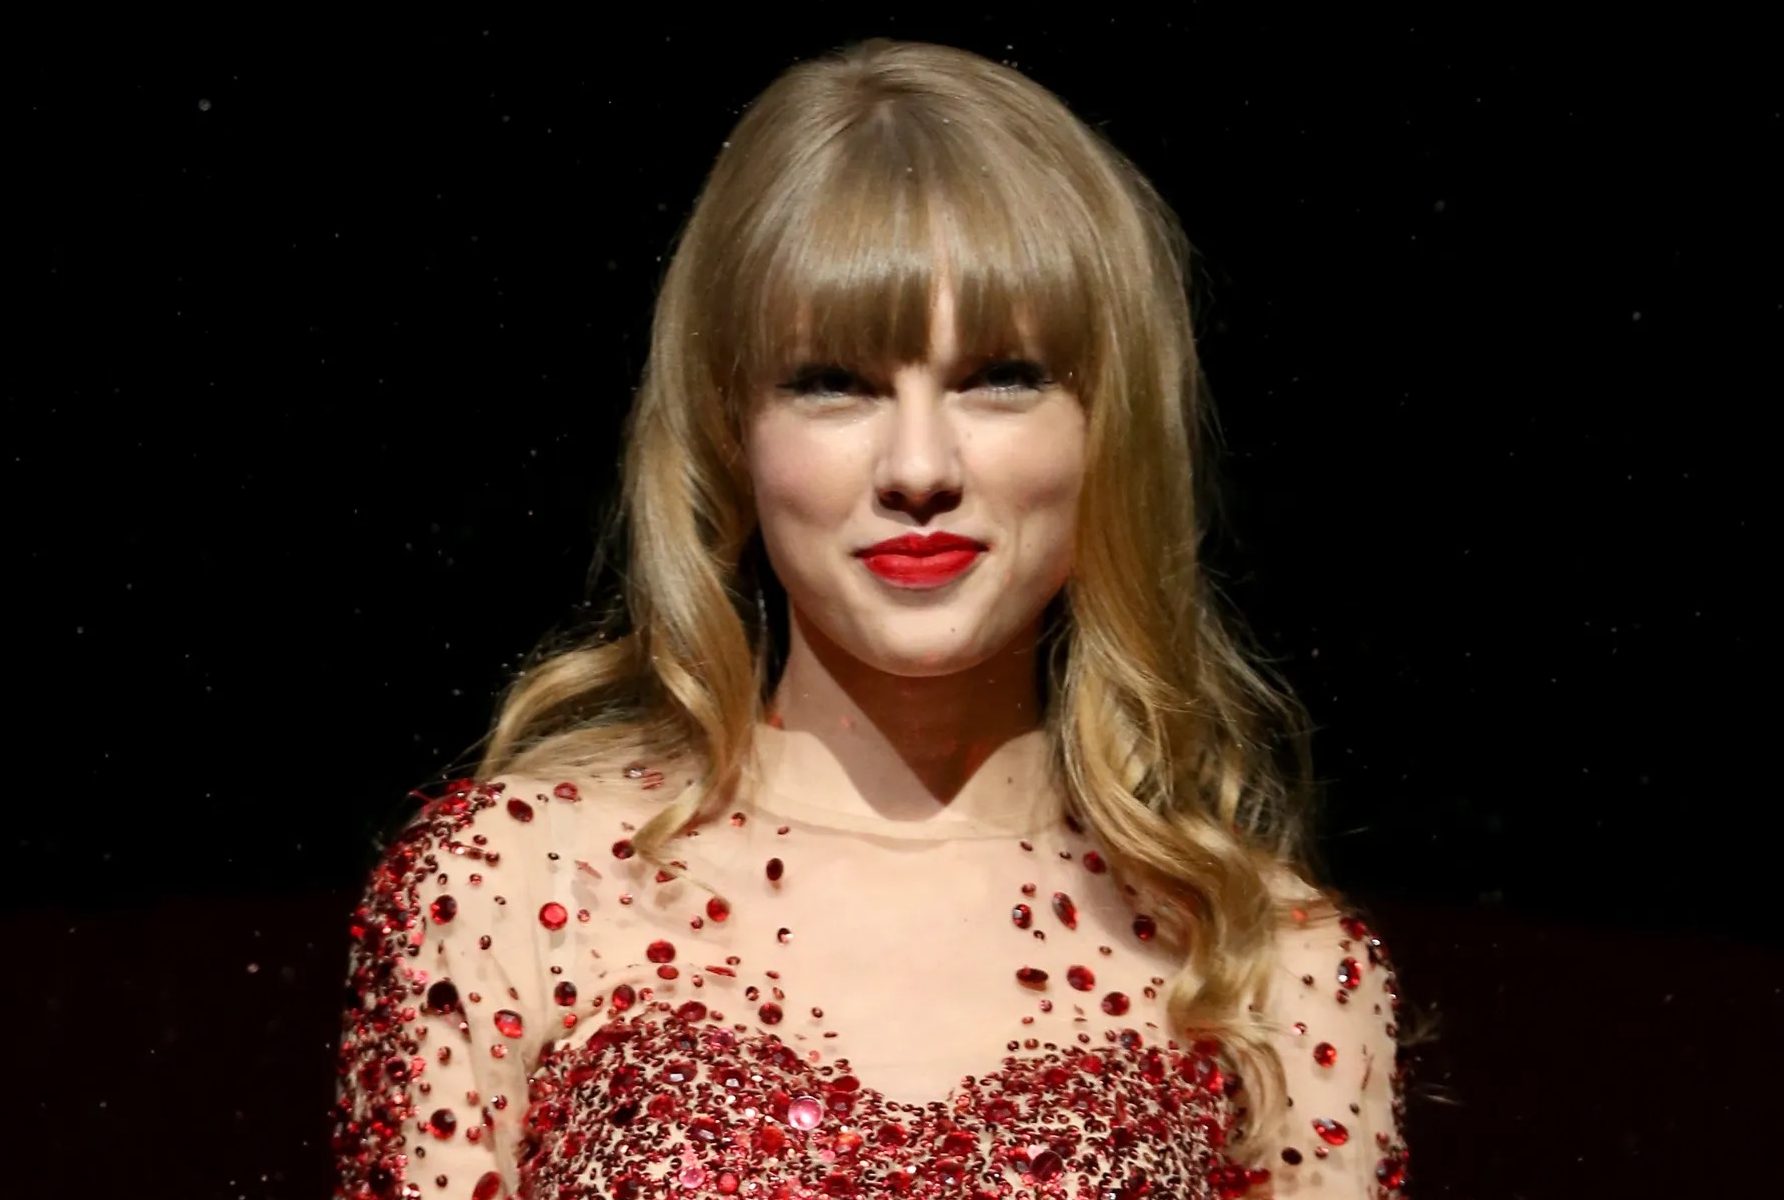 Taylor Swift smiling against a black background.